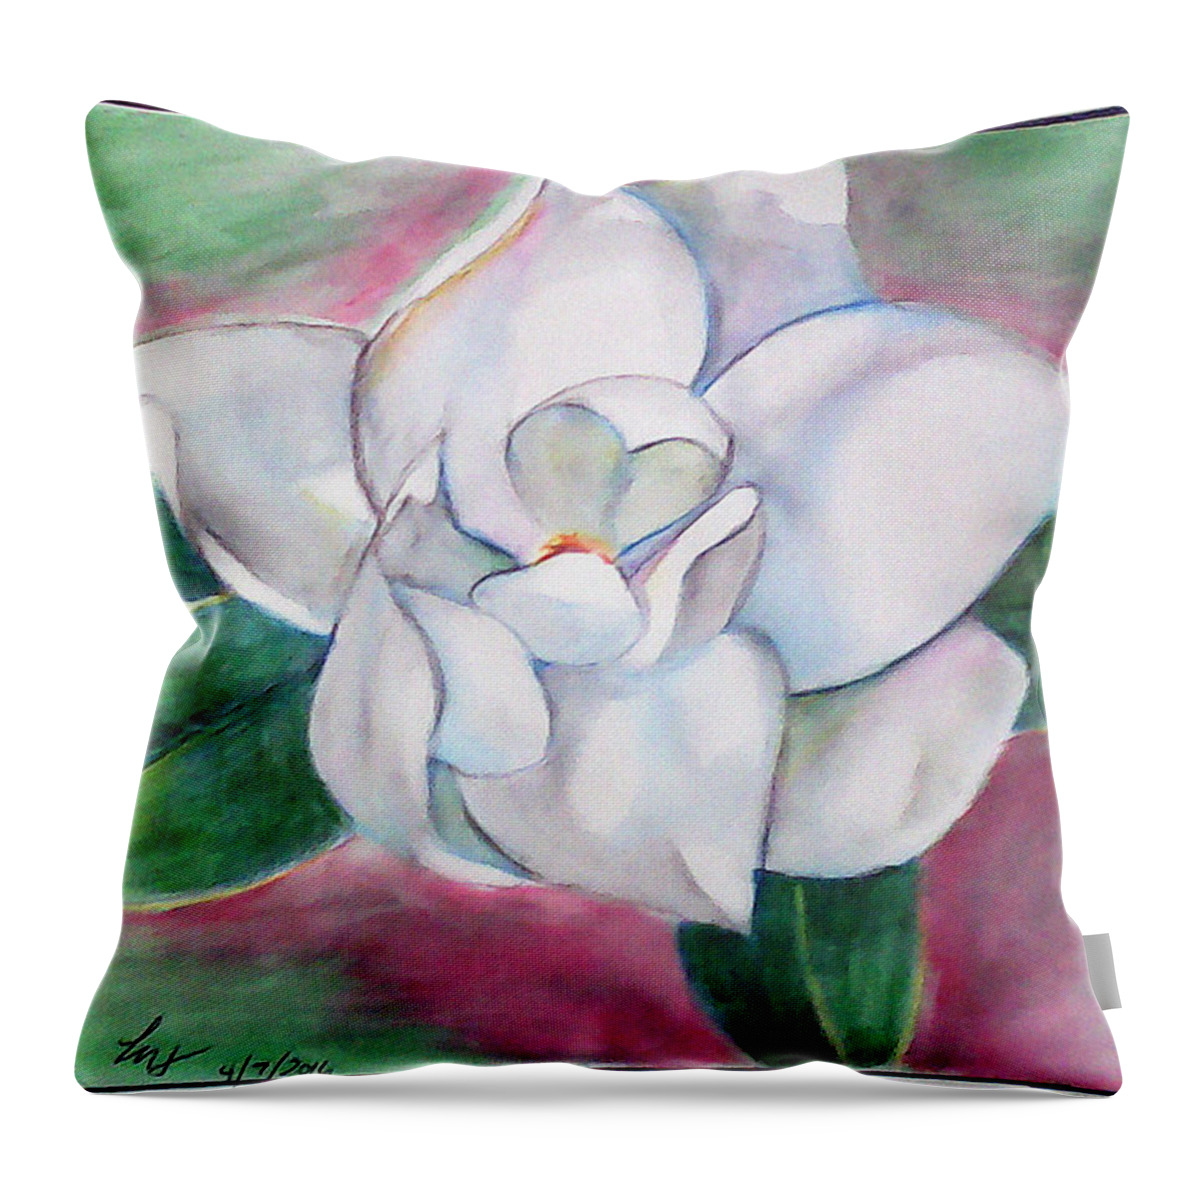 Magnolia Throw Pillow featuring the painting Magnolia 2 by Loretta Nash